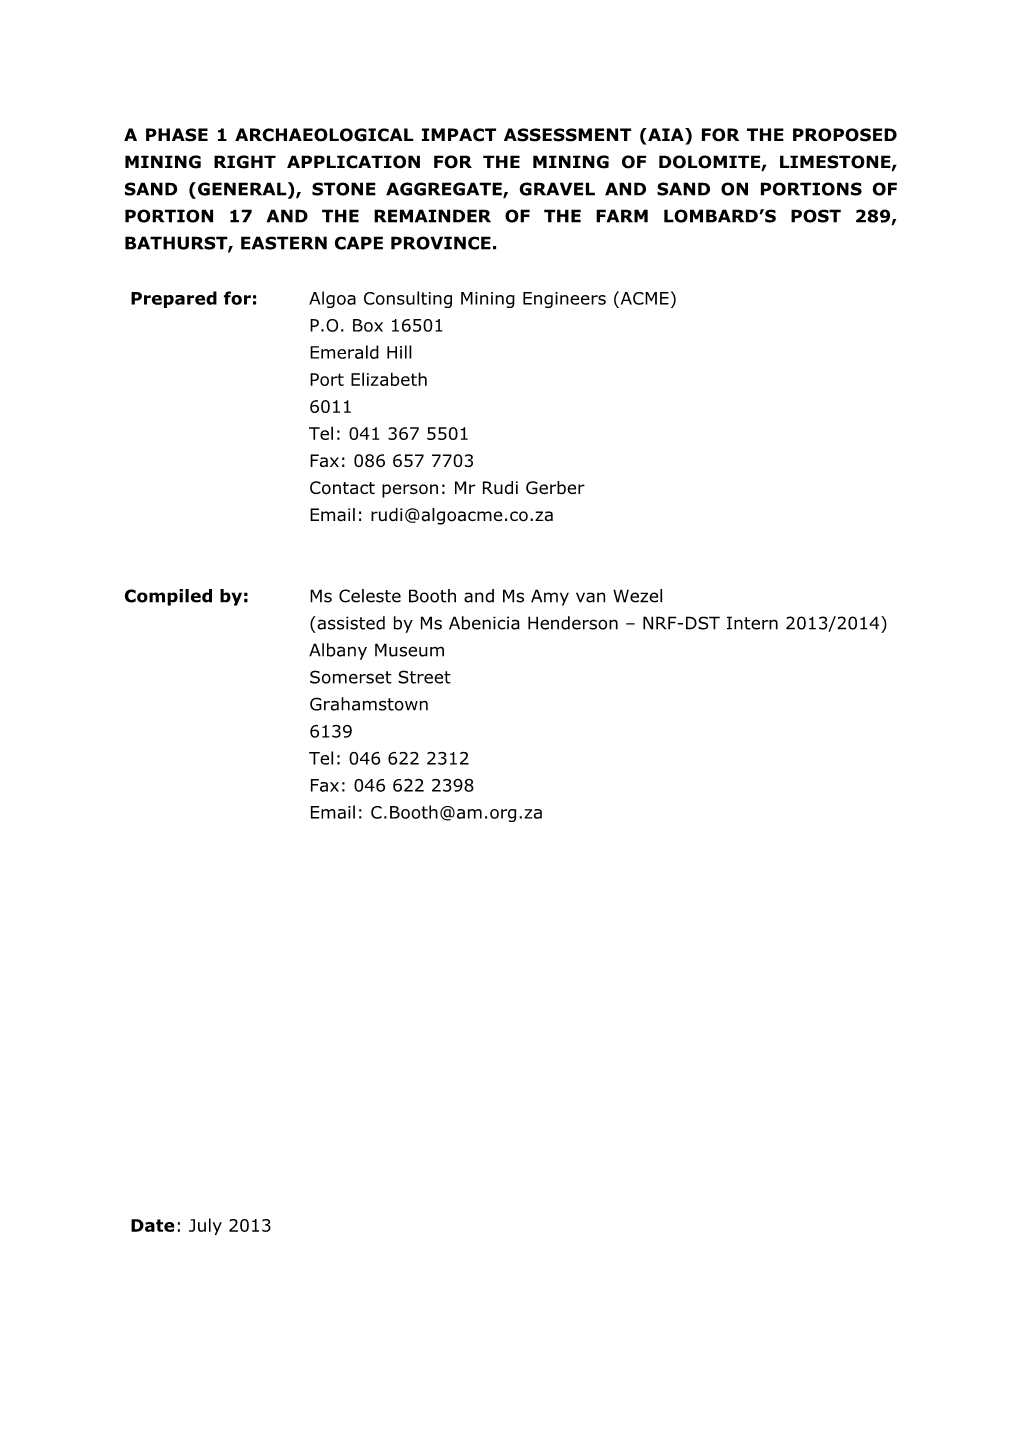 Southwell Amended AIA 20130819.Pdf